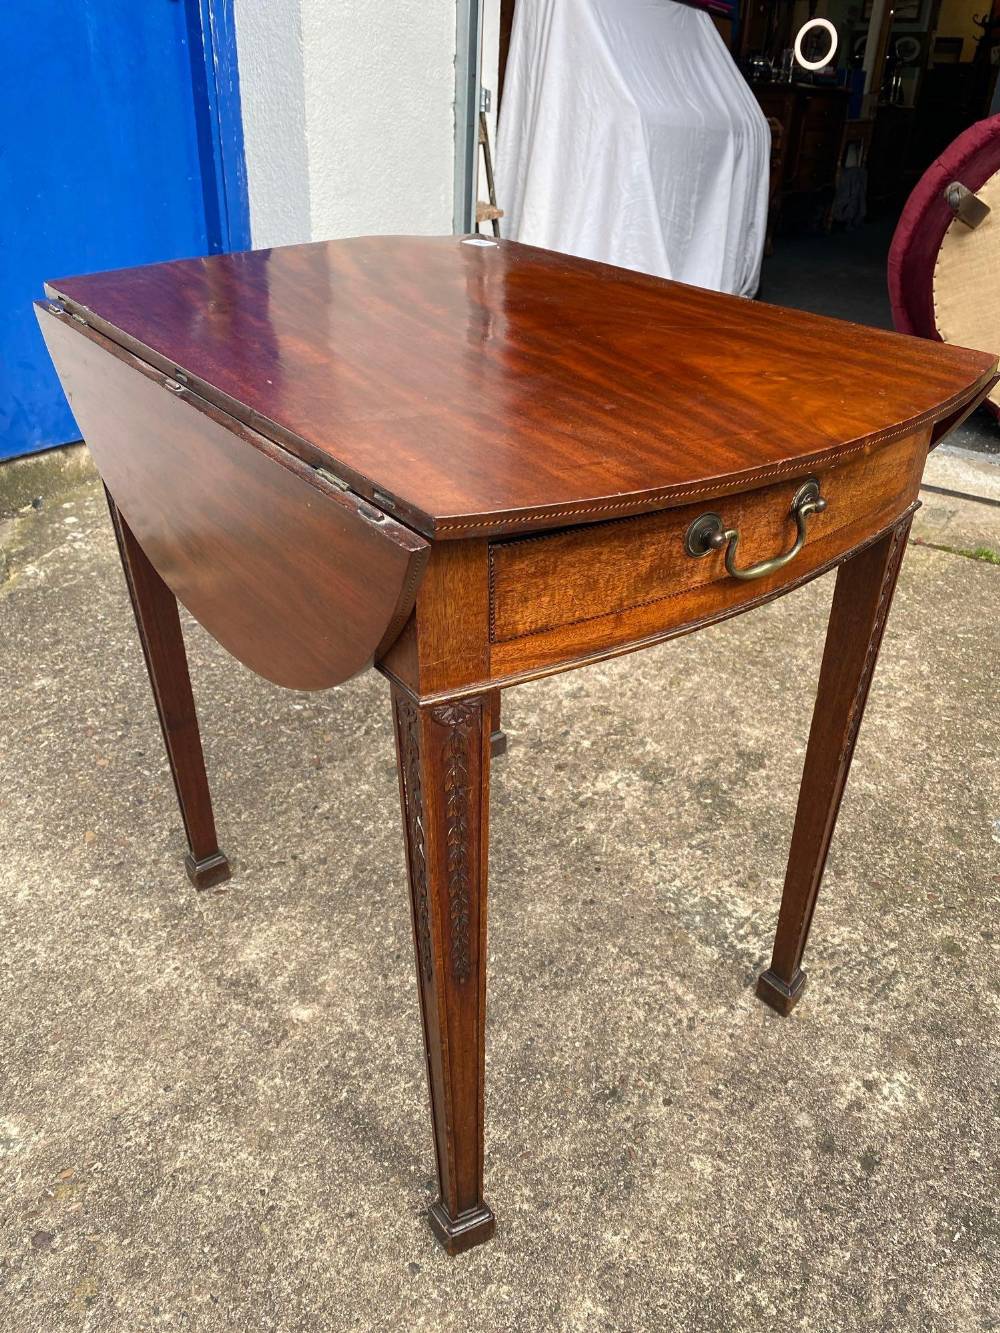 Early George III mahogany Pembroke table with oval top rounded ends on spade legs